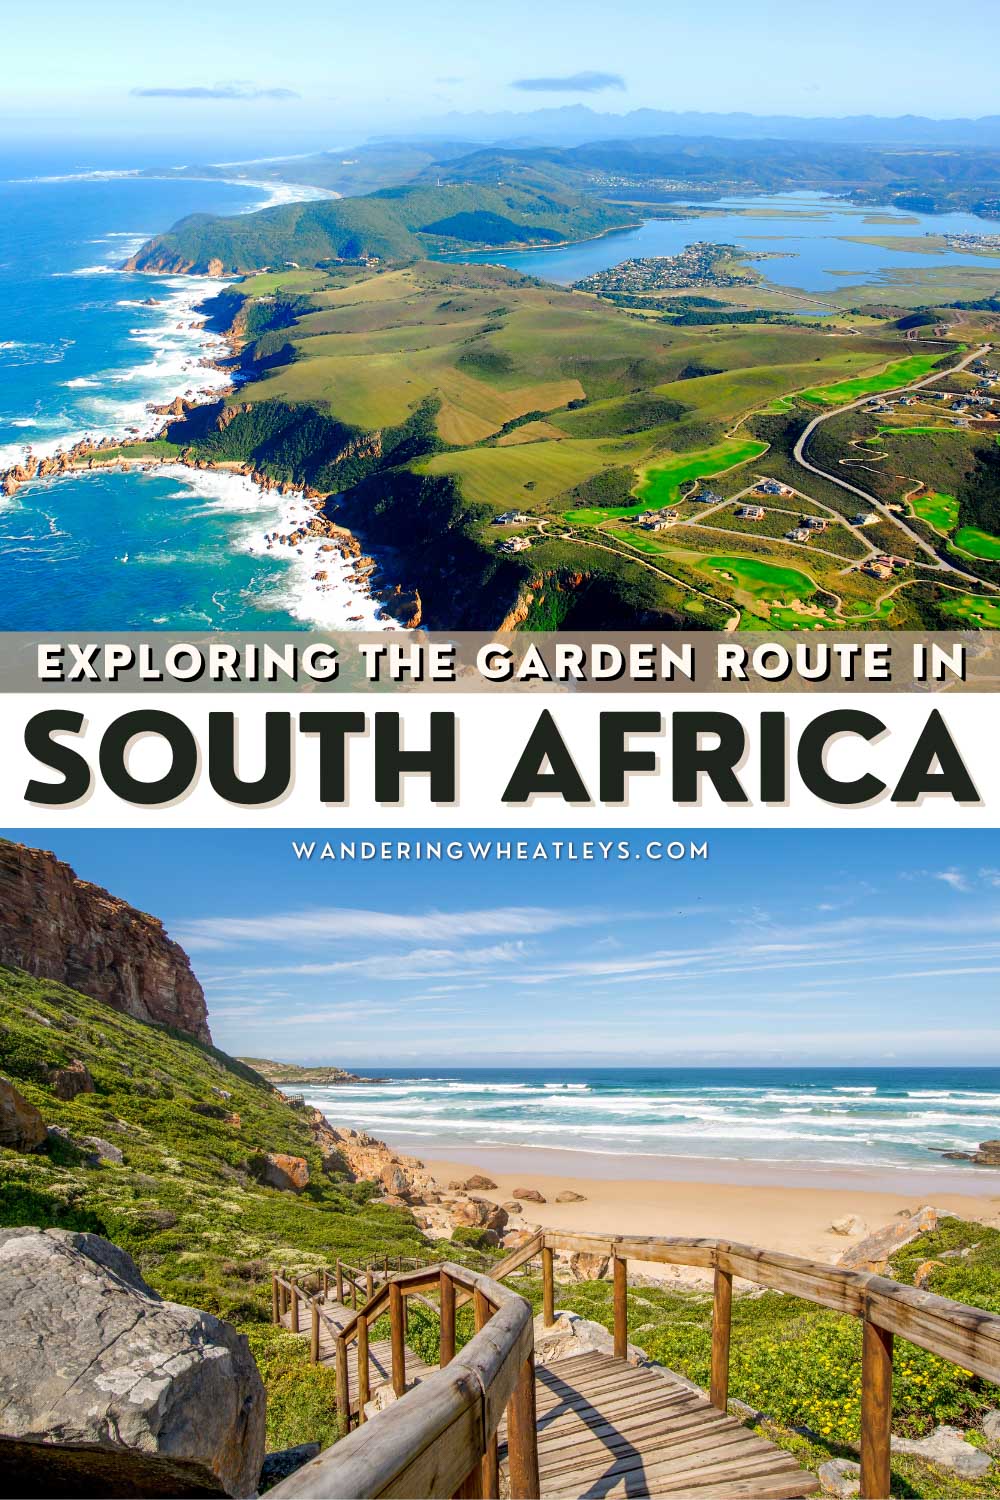 Guide to the Garden Route in South Africa